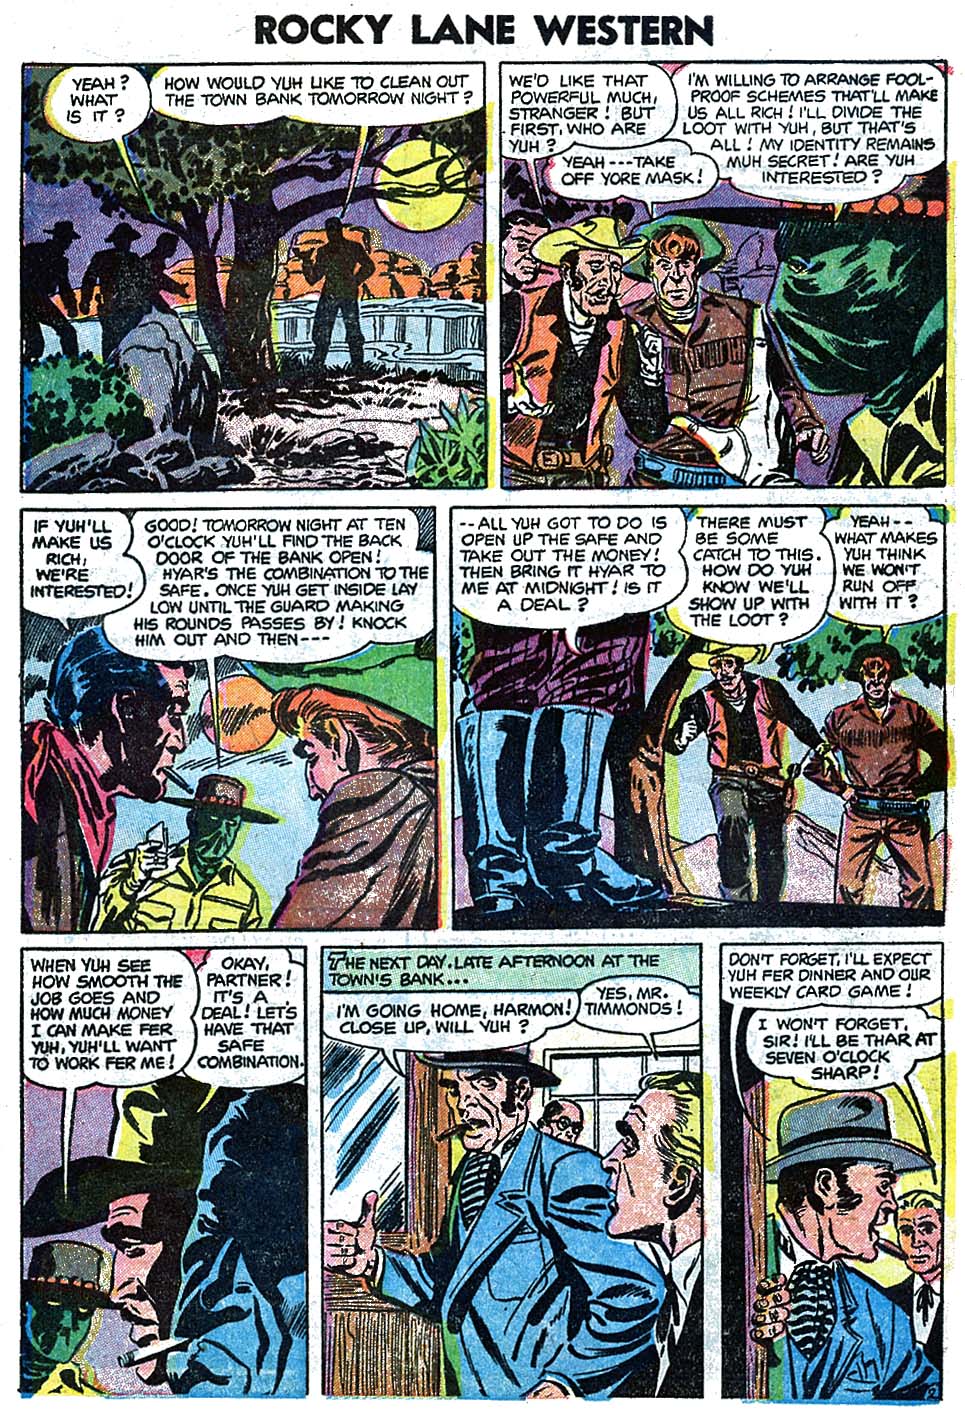 Rocky Lane Western (1954) issue 60 - Page 3